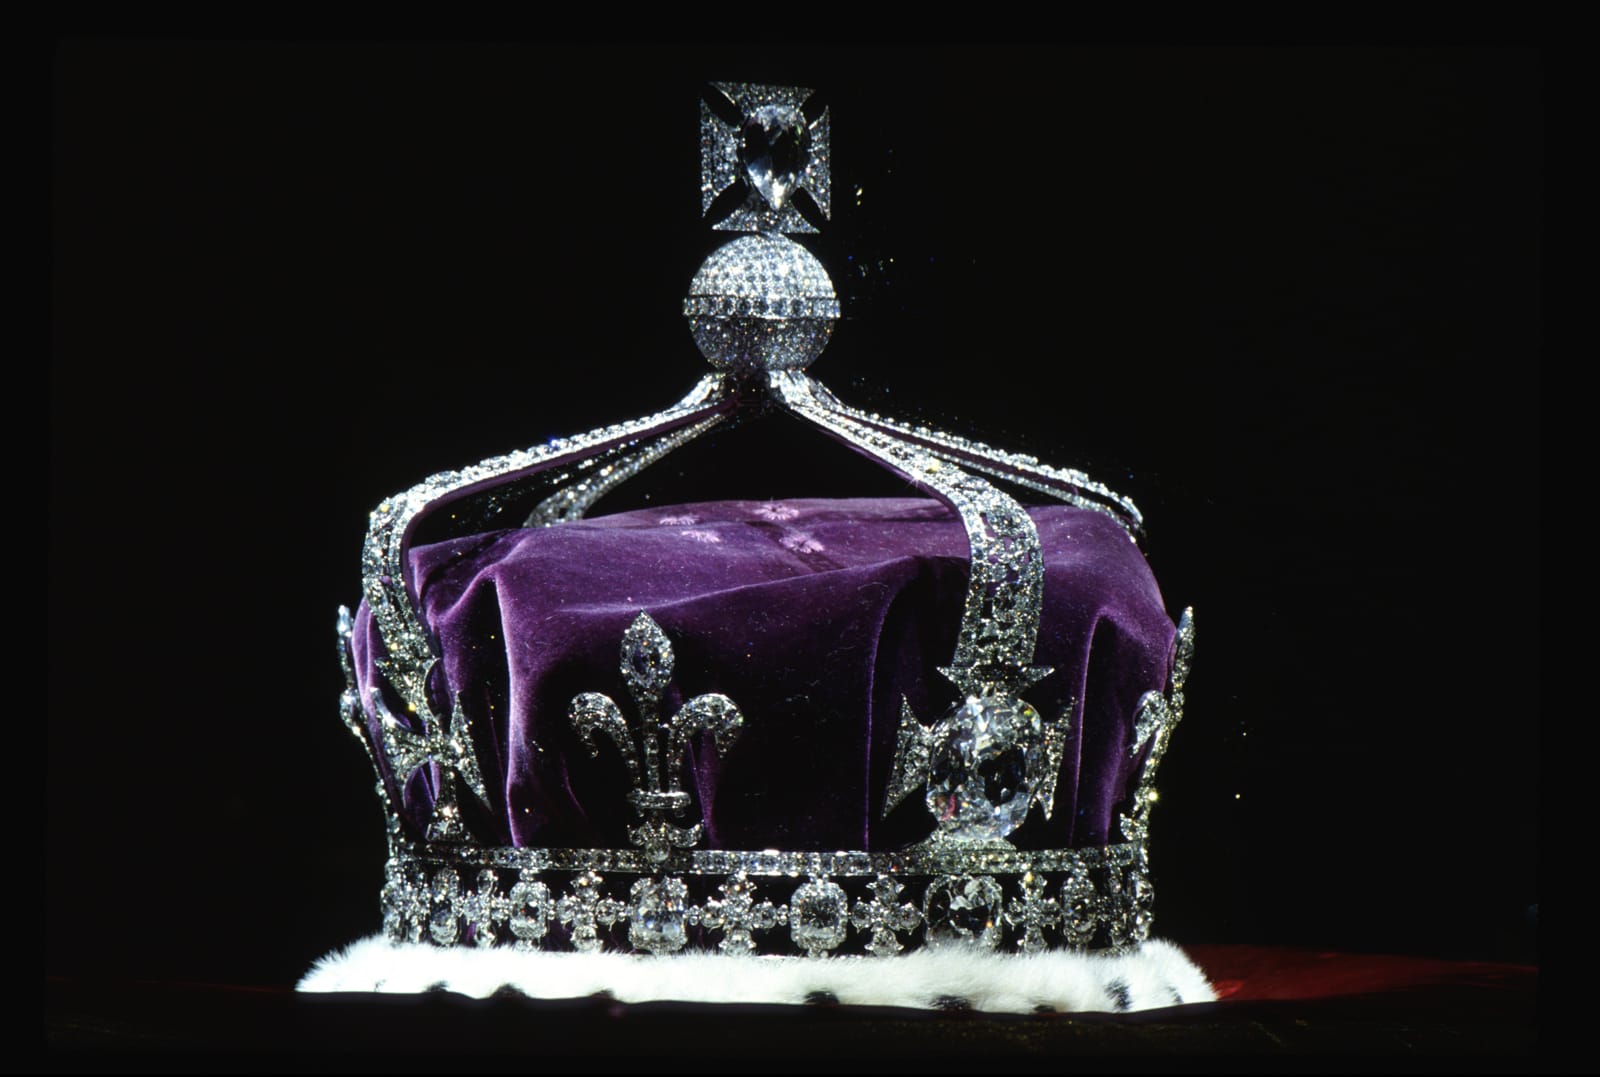 The Crown Of Queen Elizabeth, The Queen Mother, and worn at the 1937 coronation, containing the famous Koh-i-noor diamond along with other gems (Tim Graham Photo Library via Getty Images)